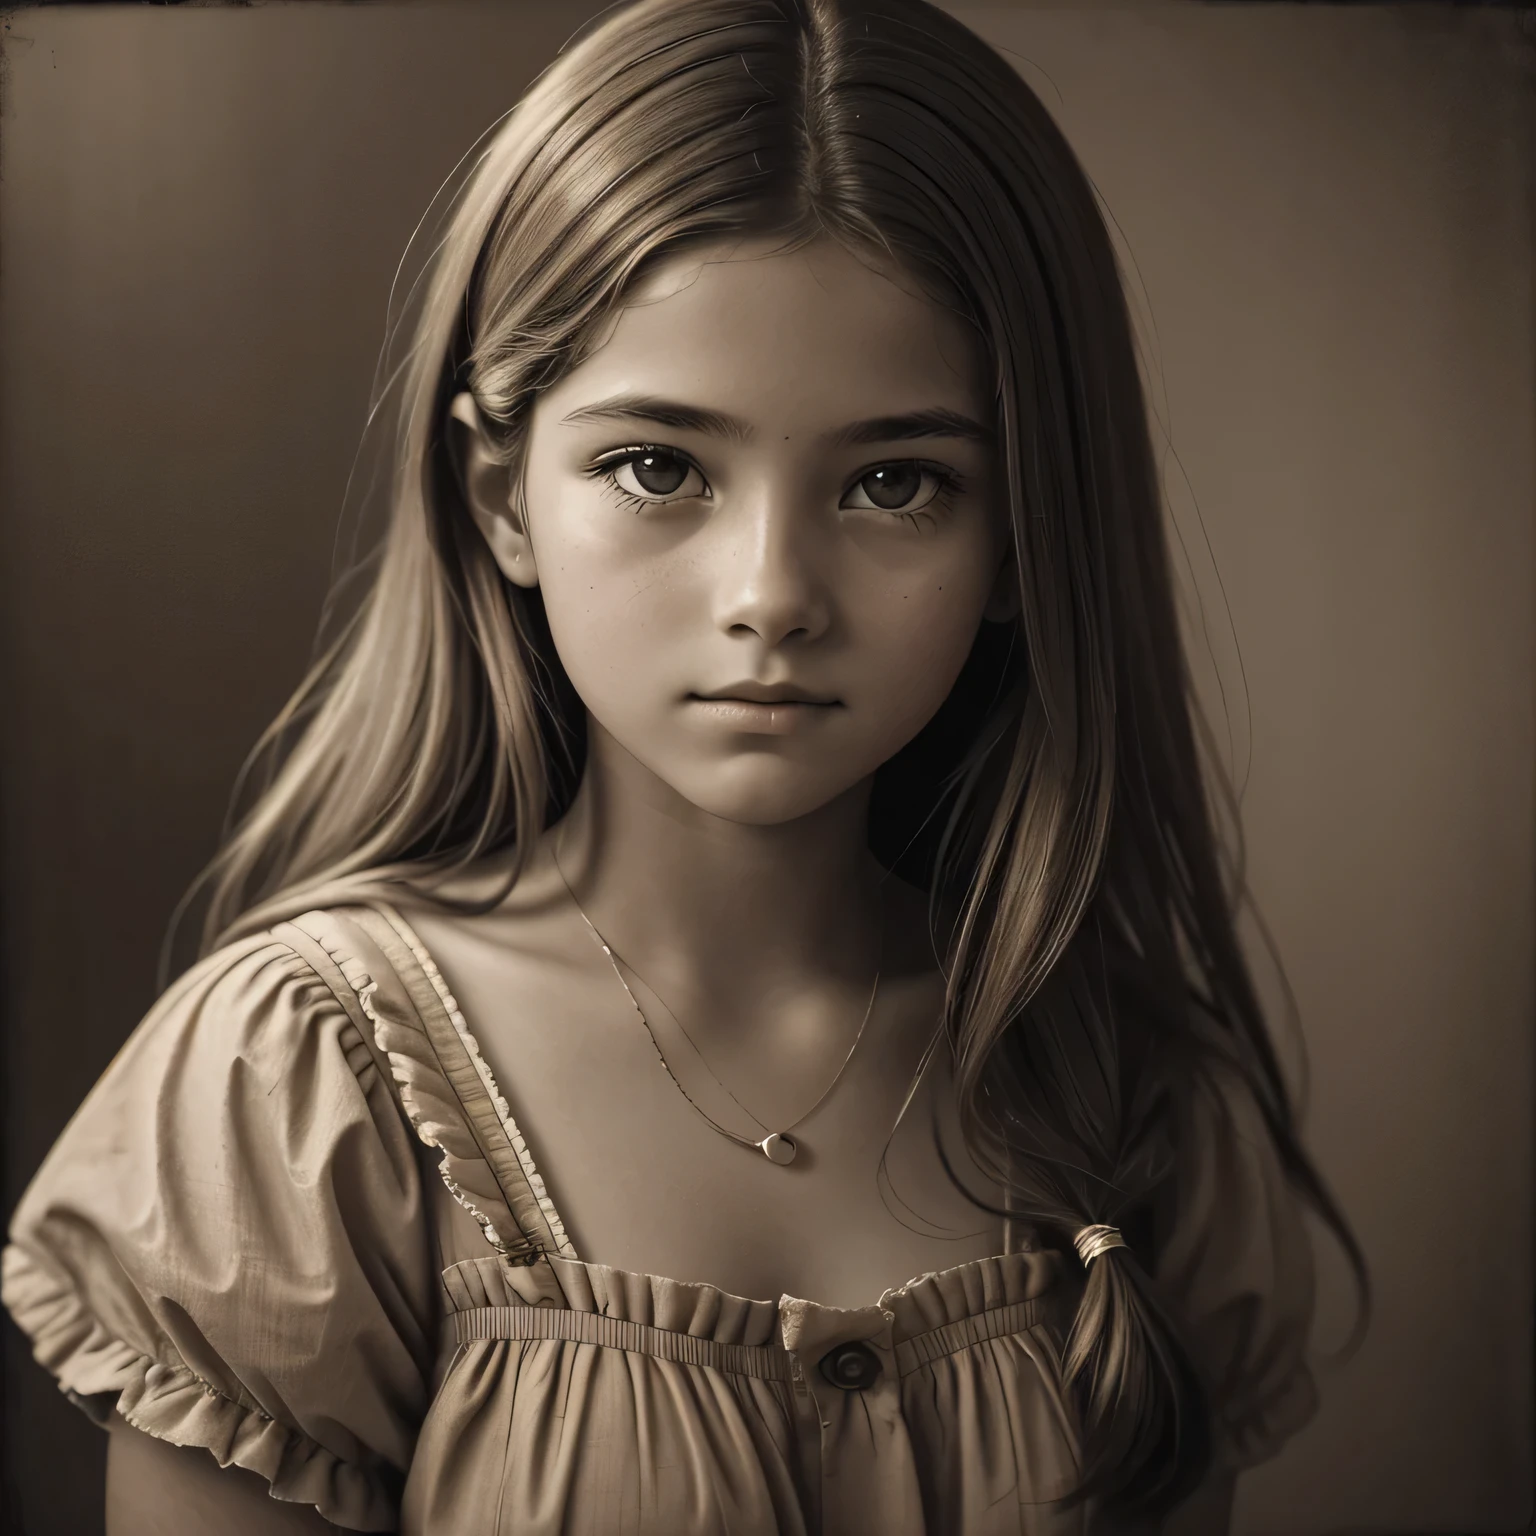 ((Retro sepia photo)), from front: 1.5, faded and blurred, discolored sepia: 1.2, (Portrait of a beautiful 12-year-old girl), ((front-on photo) Photo)), long hair, clear eyes, looking at the viewer, wearing a collarless blouse, a captivating artistic photo: 1.2, a portrait that evokes the emotion of beauty